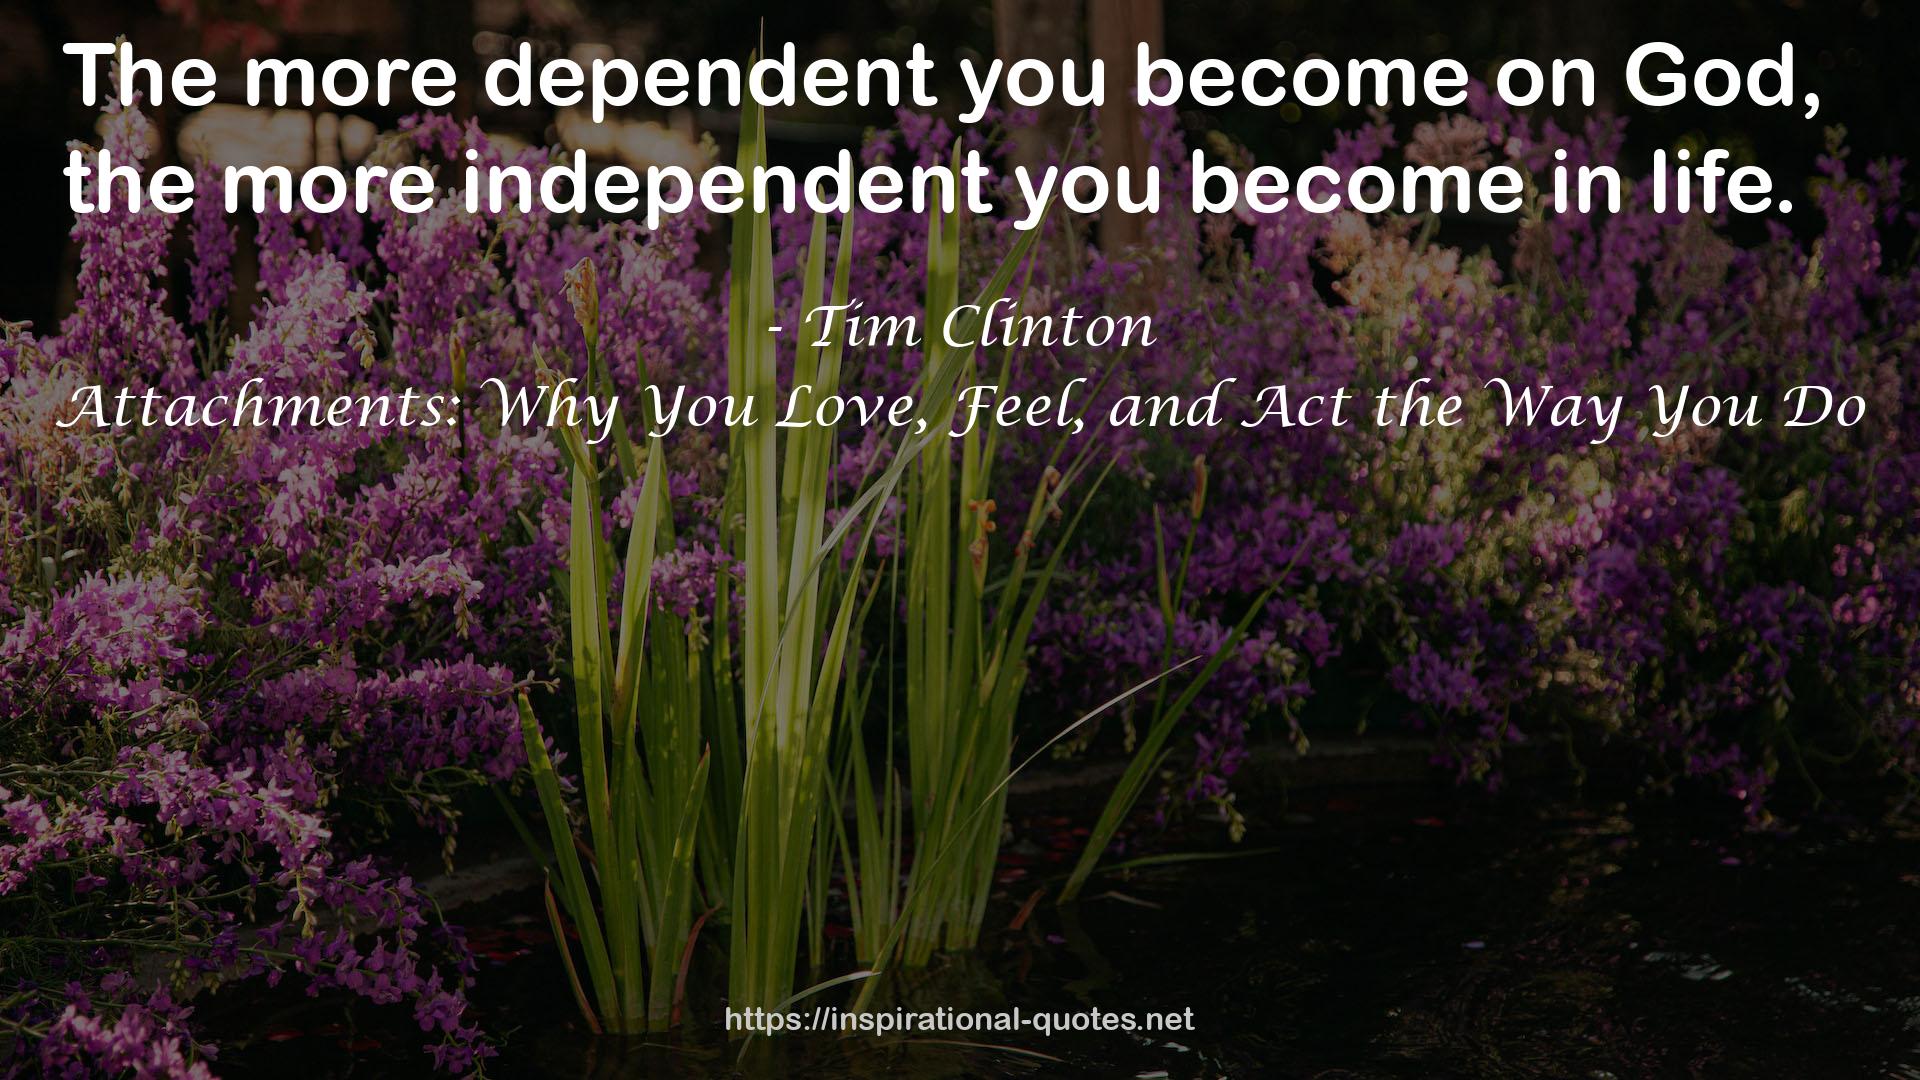 Attachments: Why You Love, Feel, and Act the Way You Do QUOTES